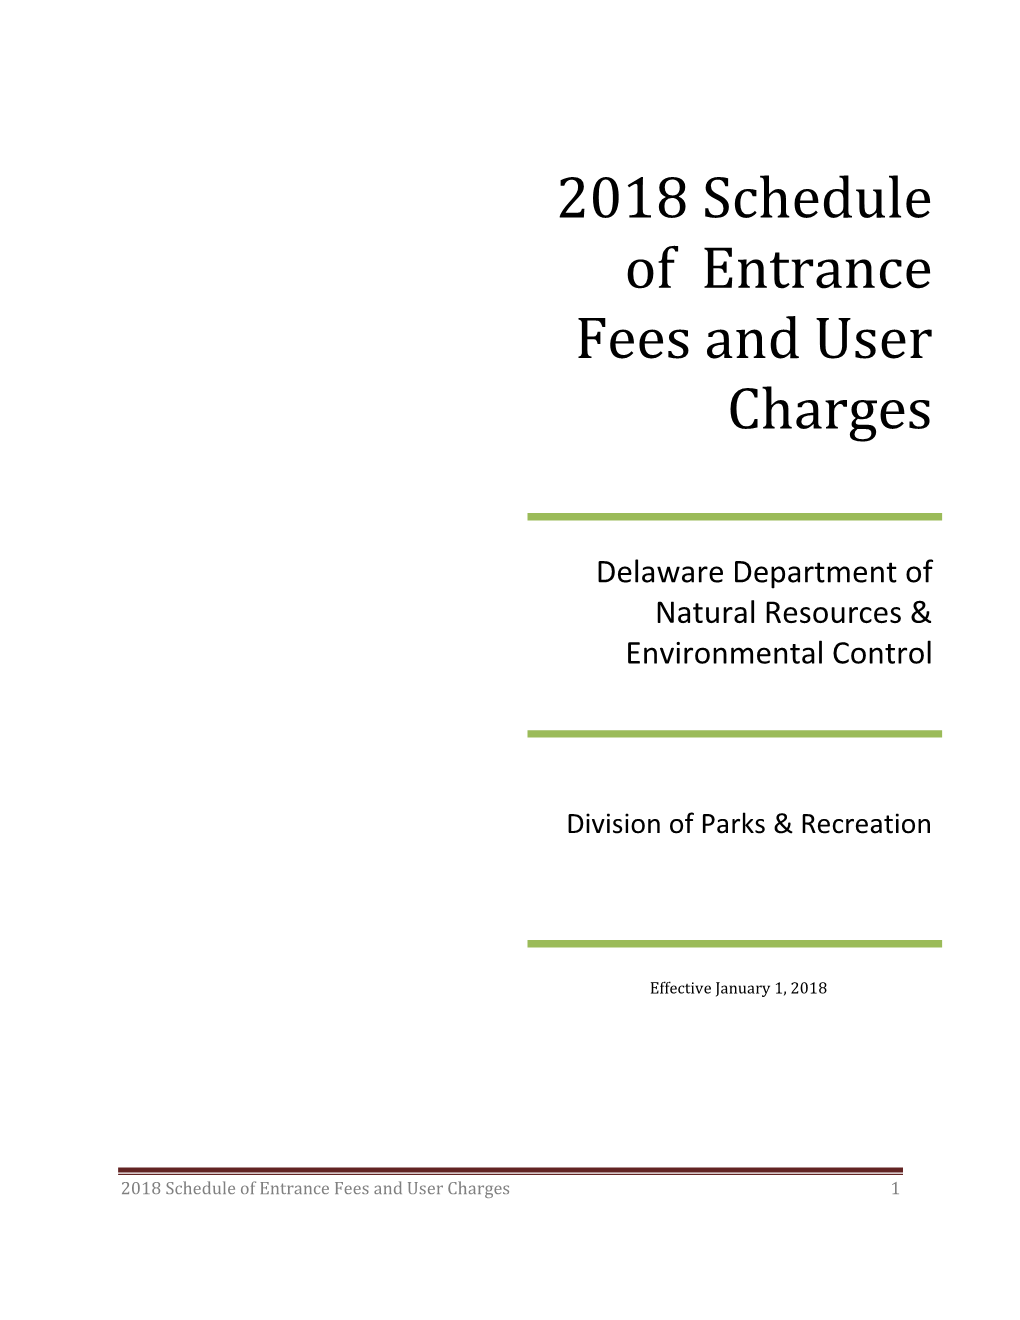 2018 Schedule of Entrance Fees and User Charges